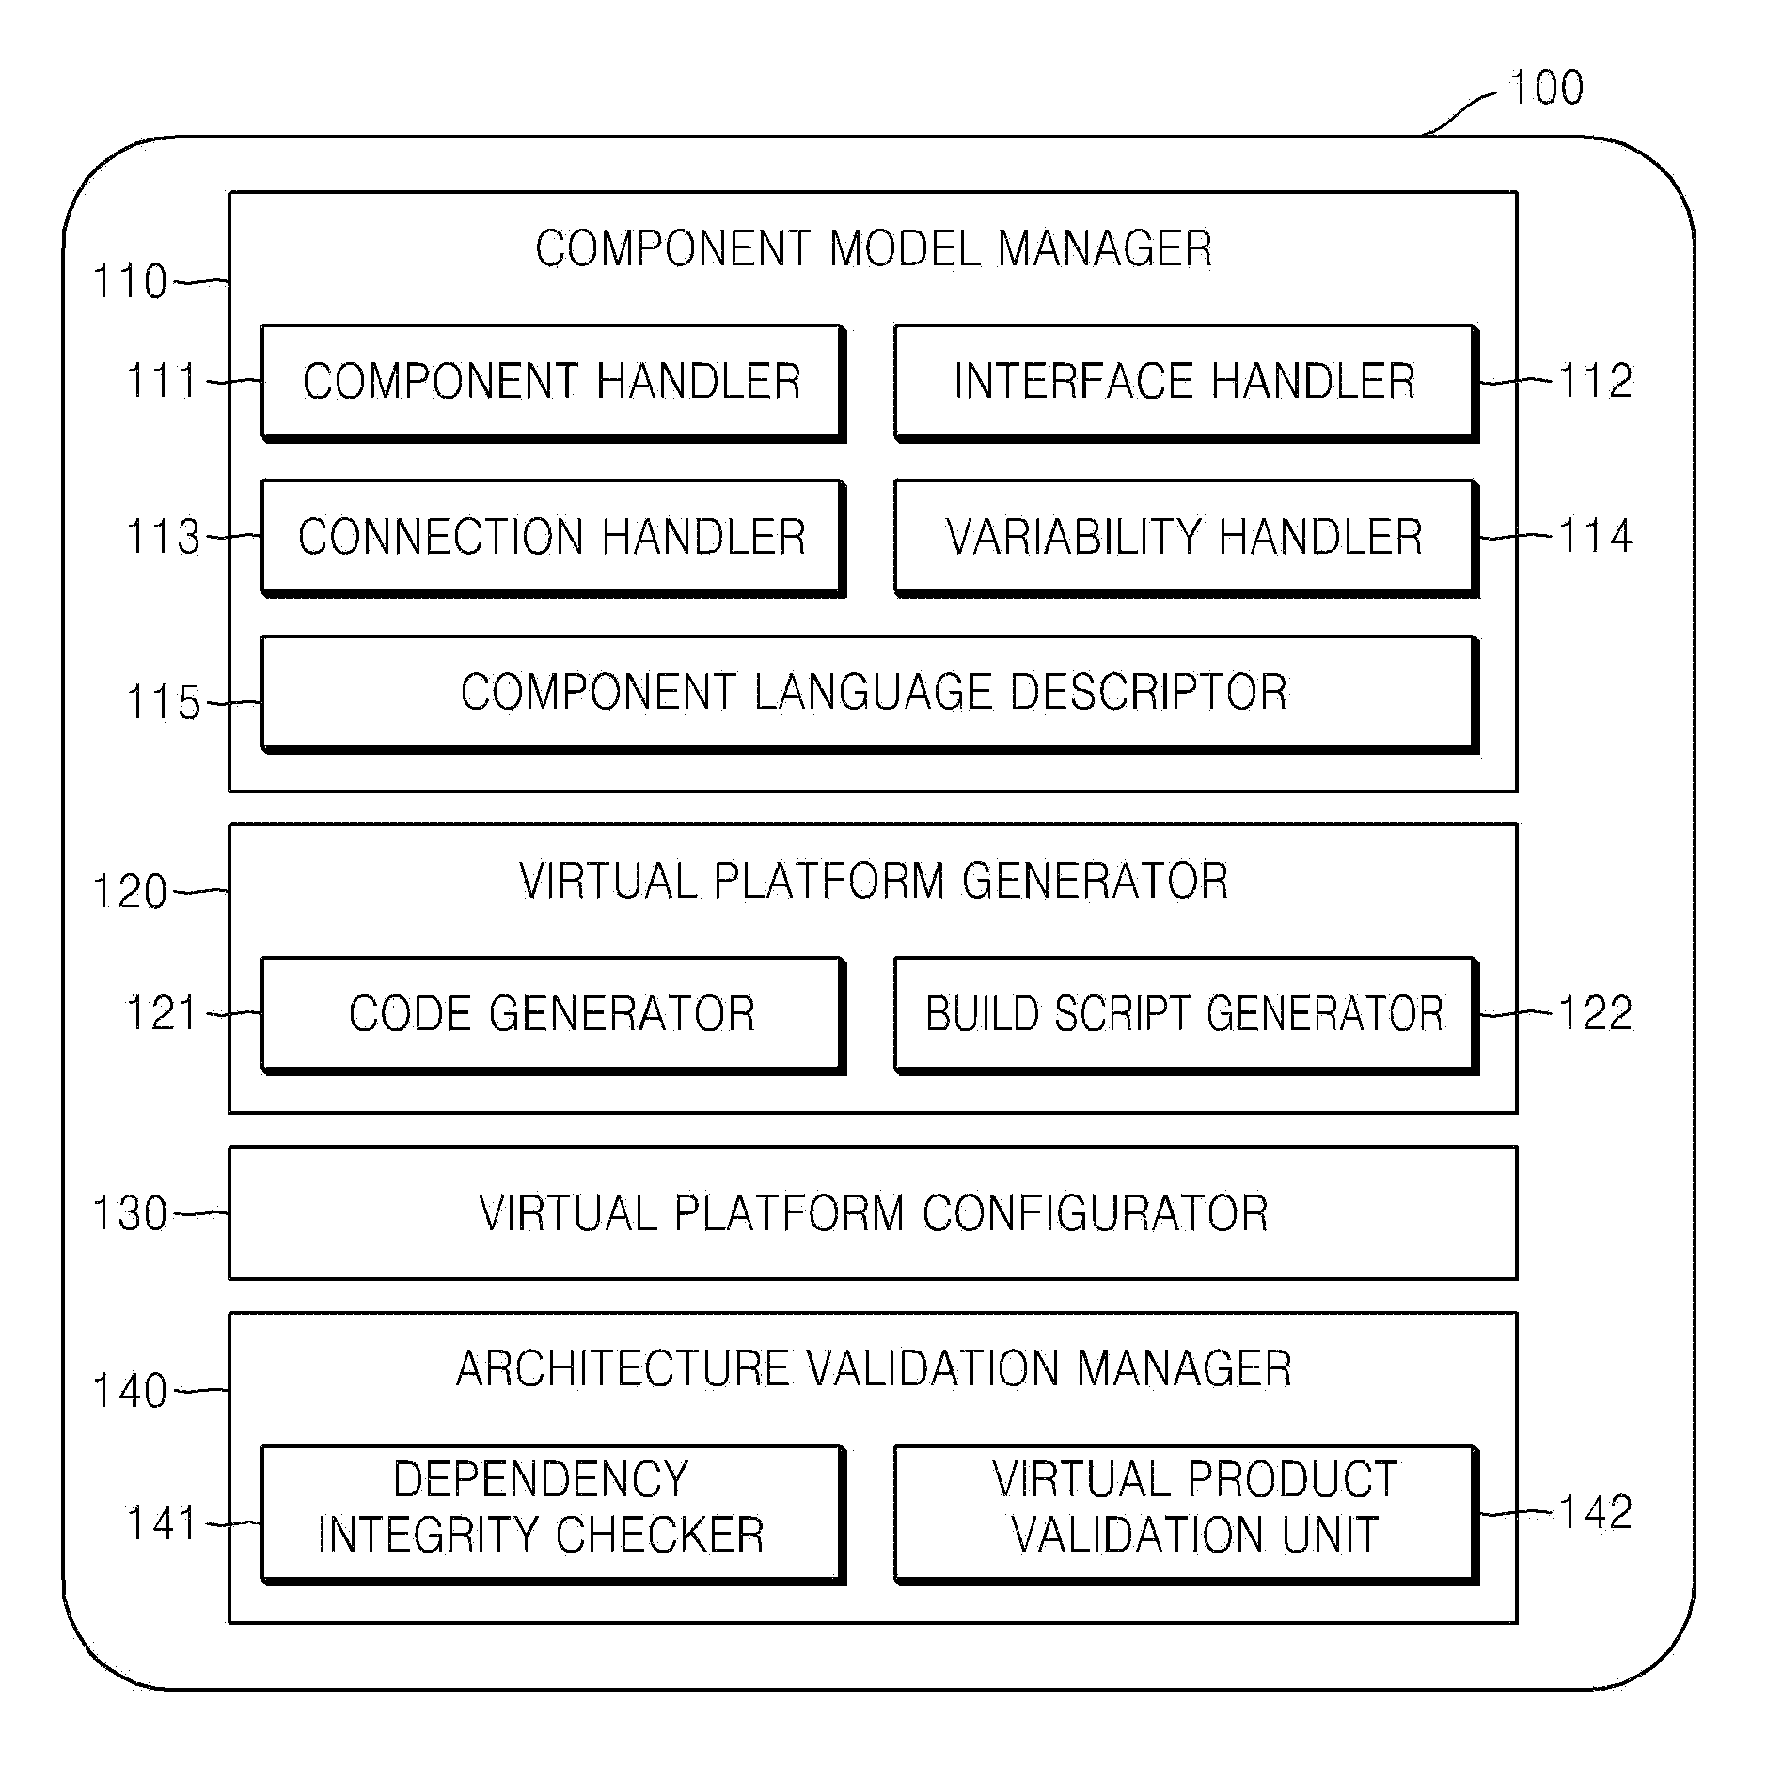 Method and apparatus for generating virtual software platform based on component model and validating software platform architecture using the platform